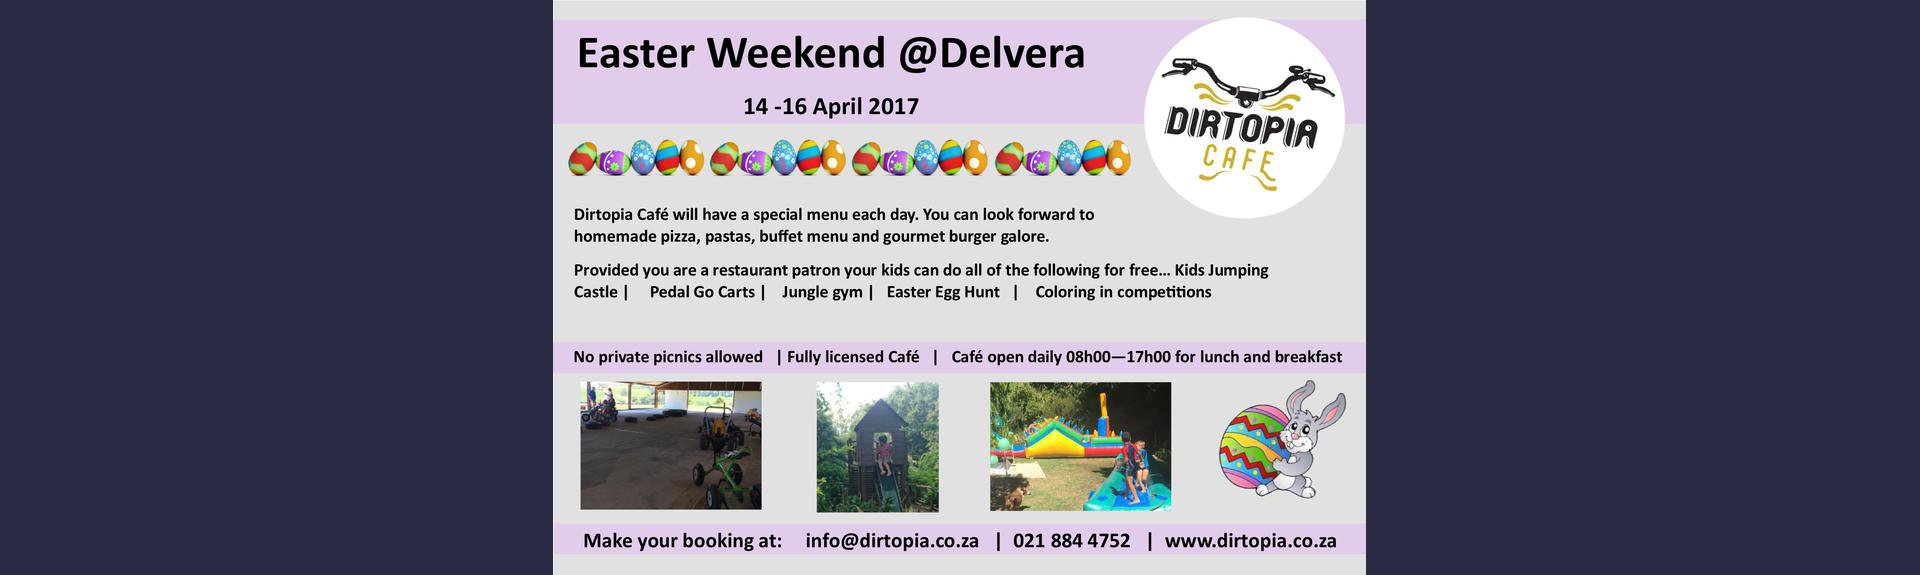 Easter Weekend at Delvera